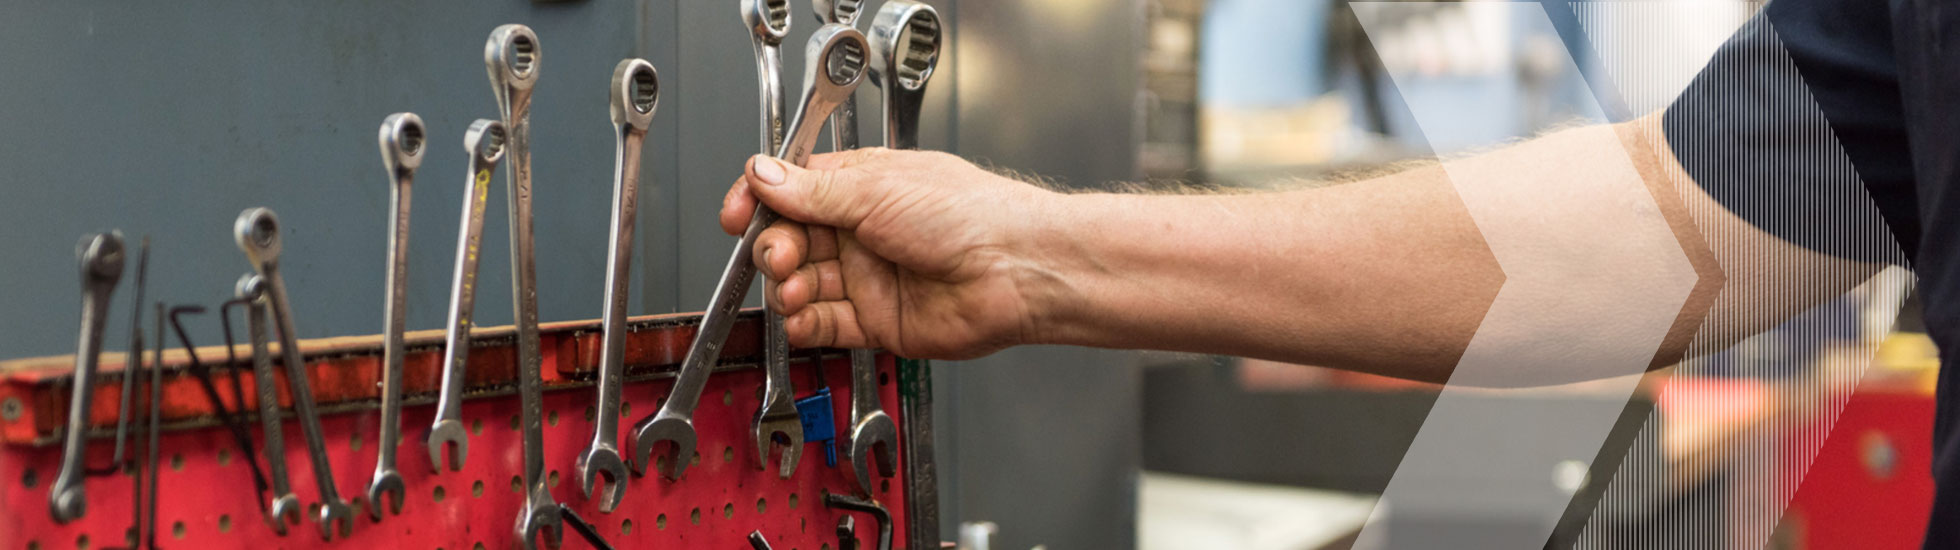 A hand reaching for a wrench in a red toolbox